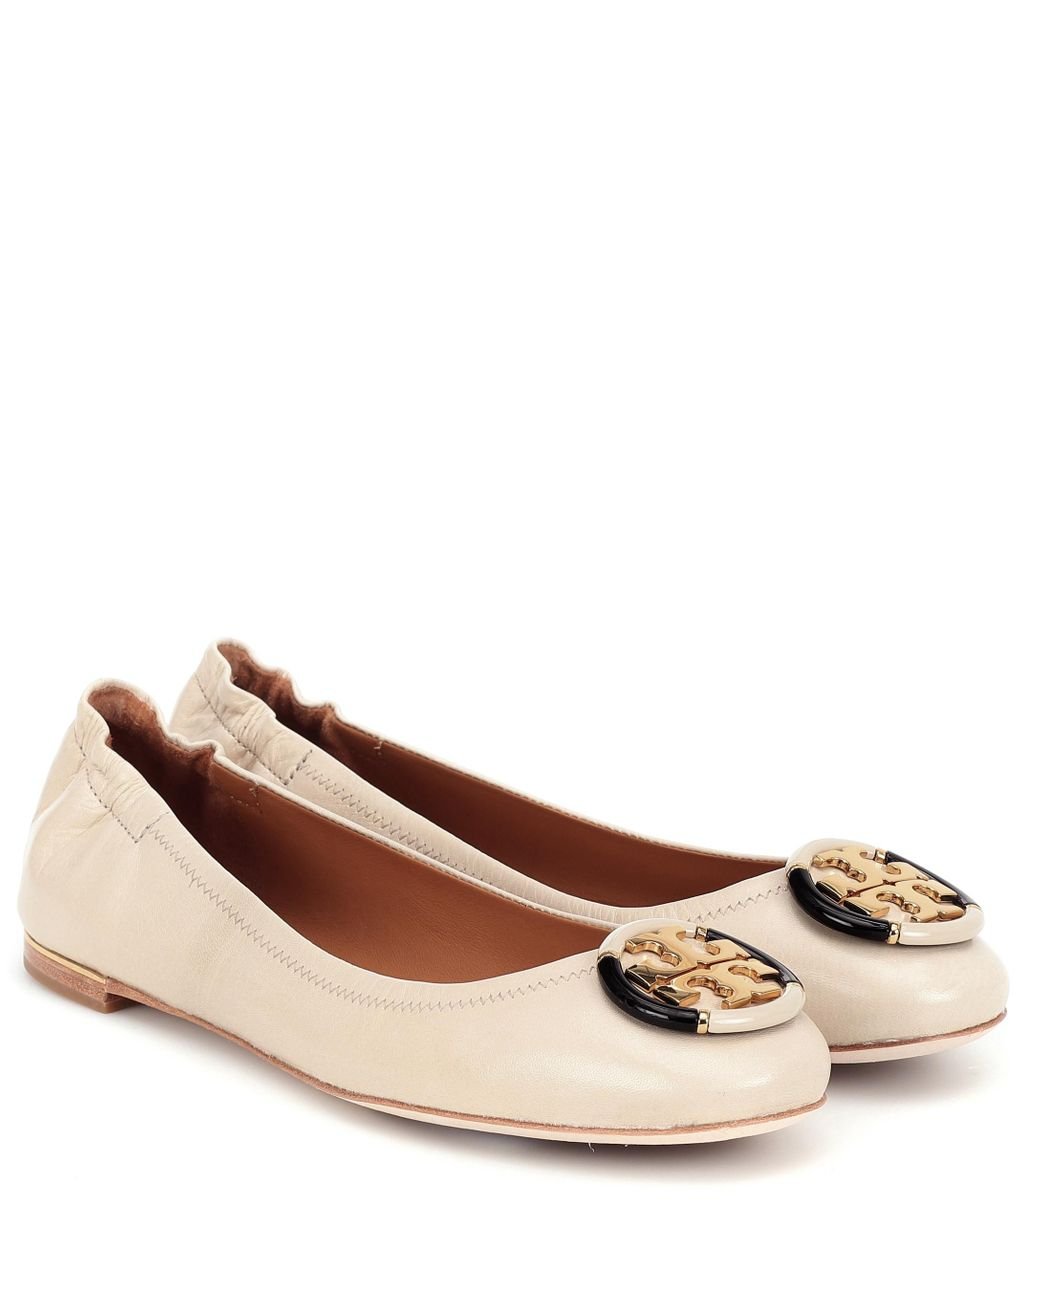 Tory Burch Minnie Leather Ballet Flats in Beige (Green) - Save 25% - Lyst